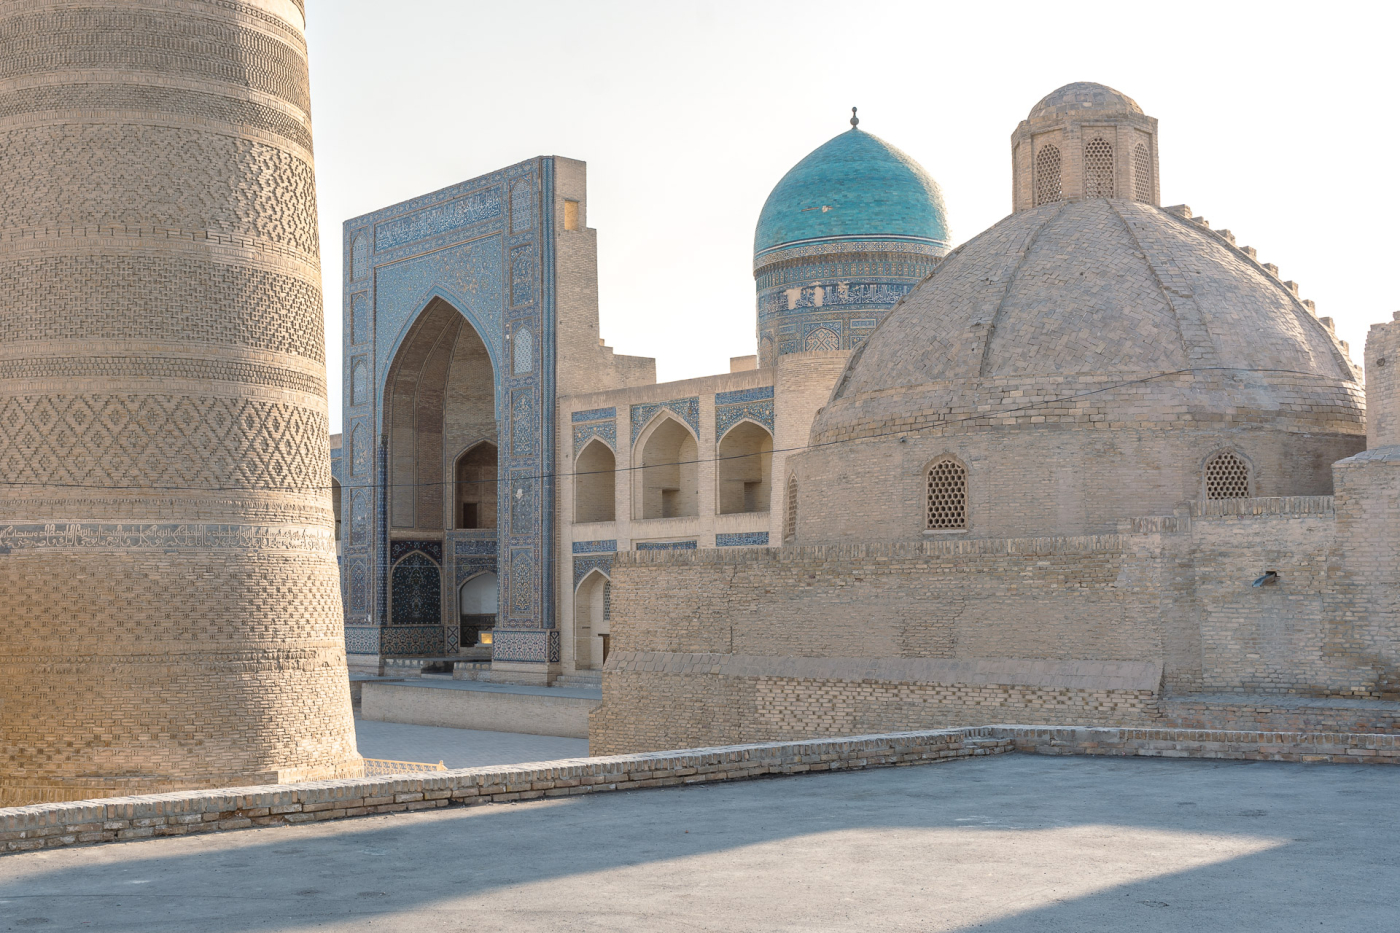 Through ancient Cities of the Silk Road